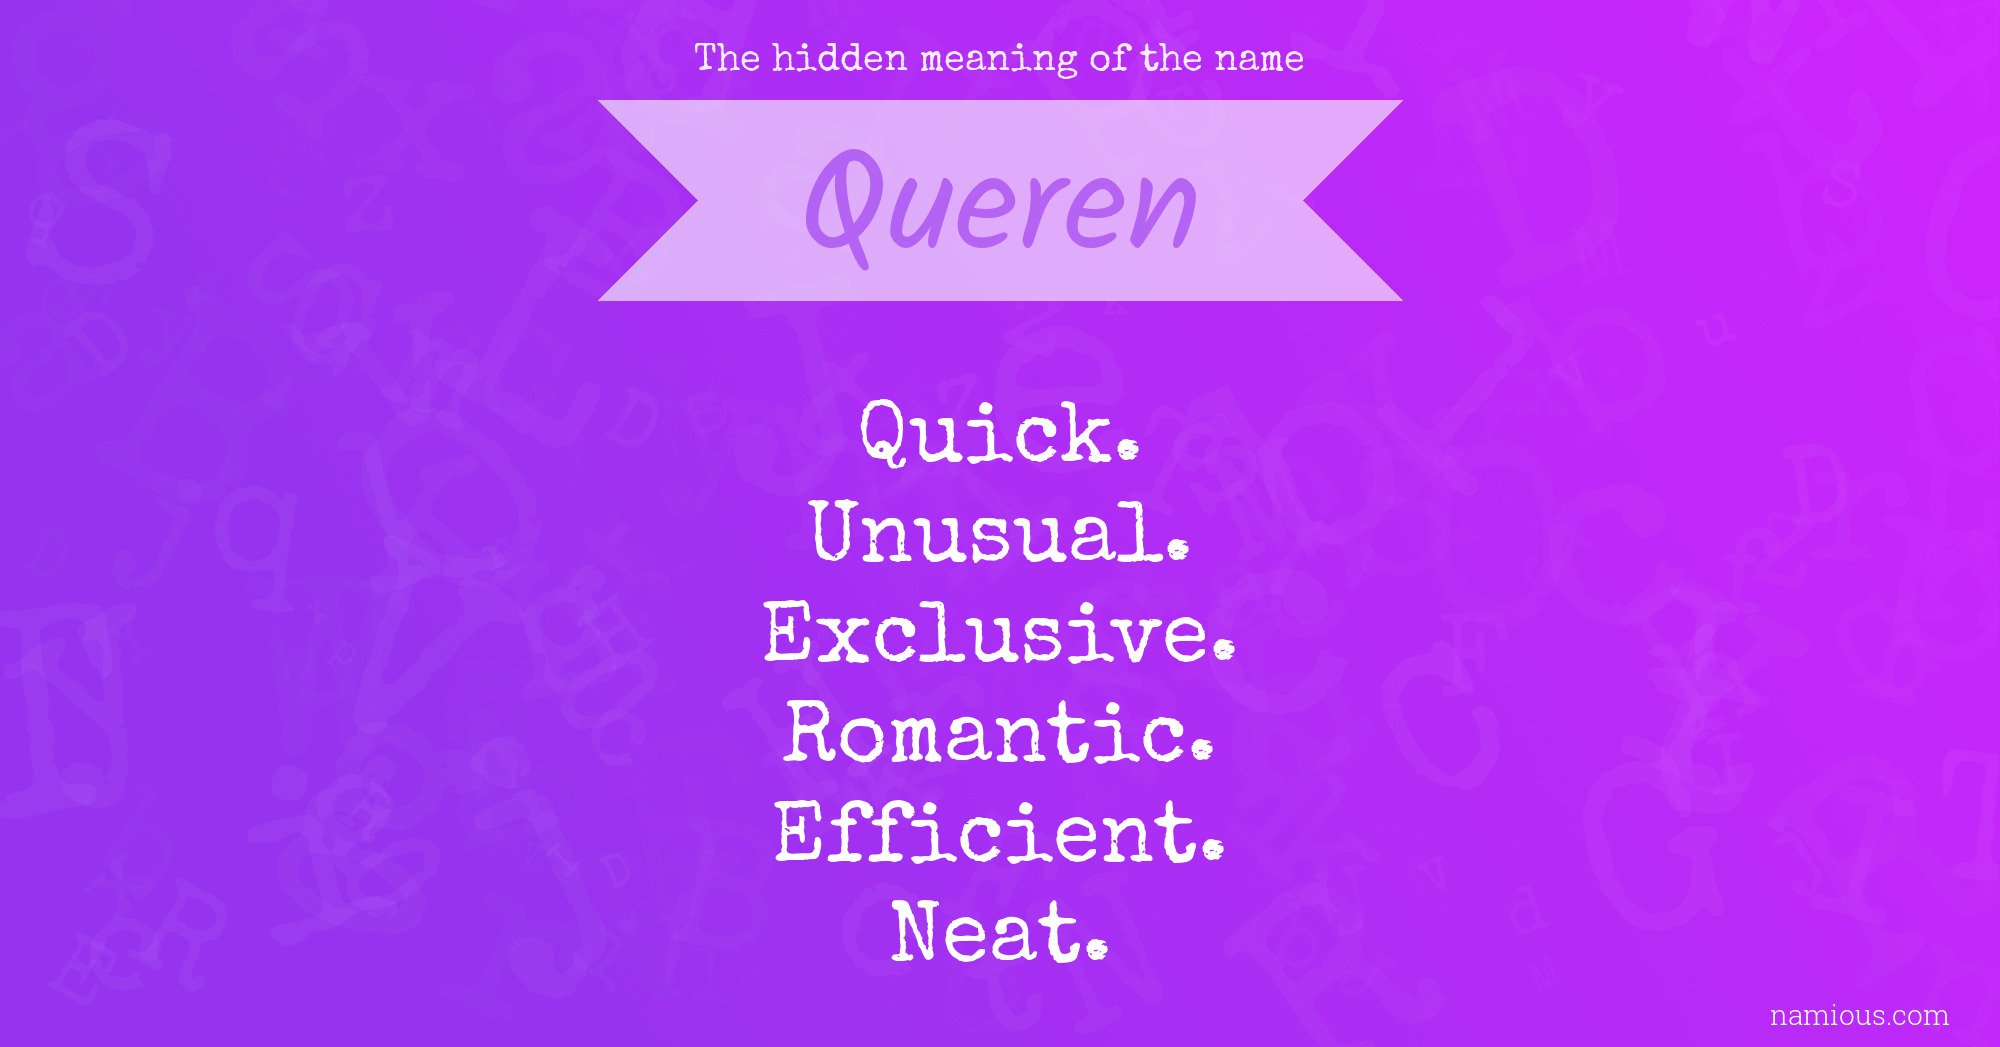 The hidden meaning of the name Queren